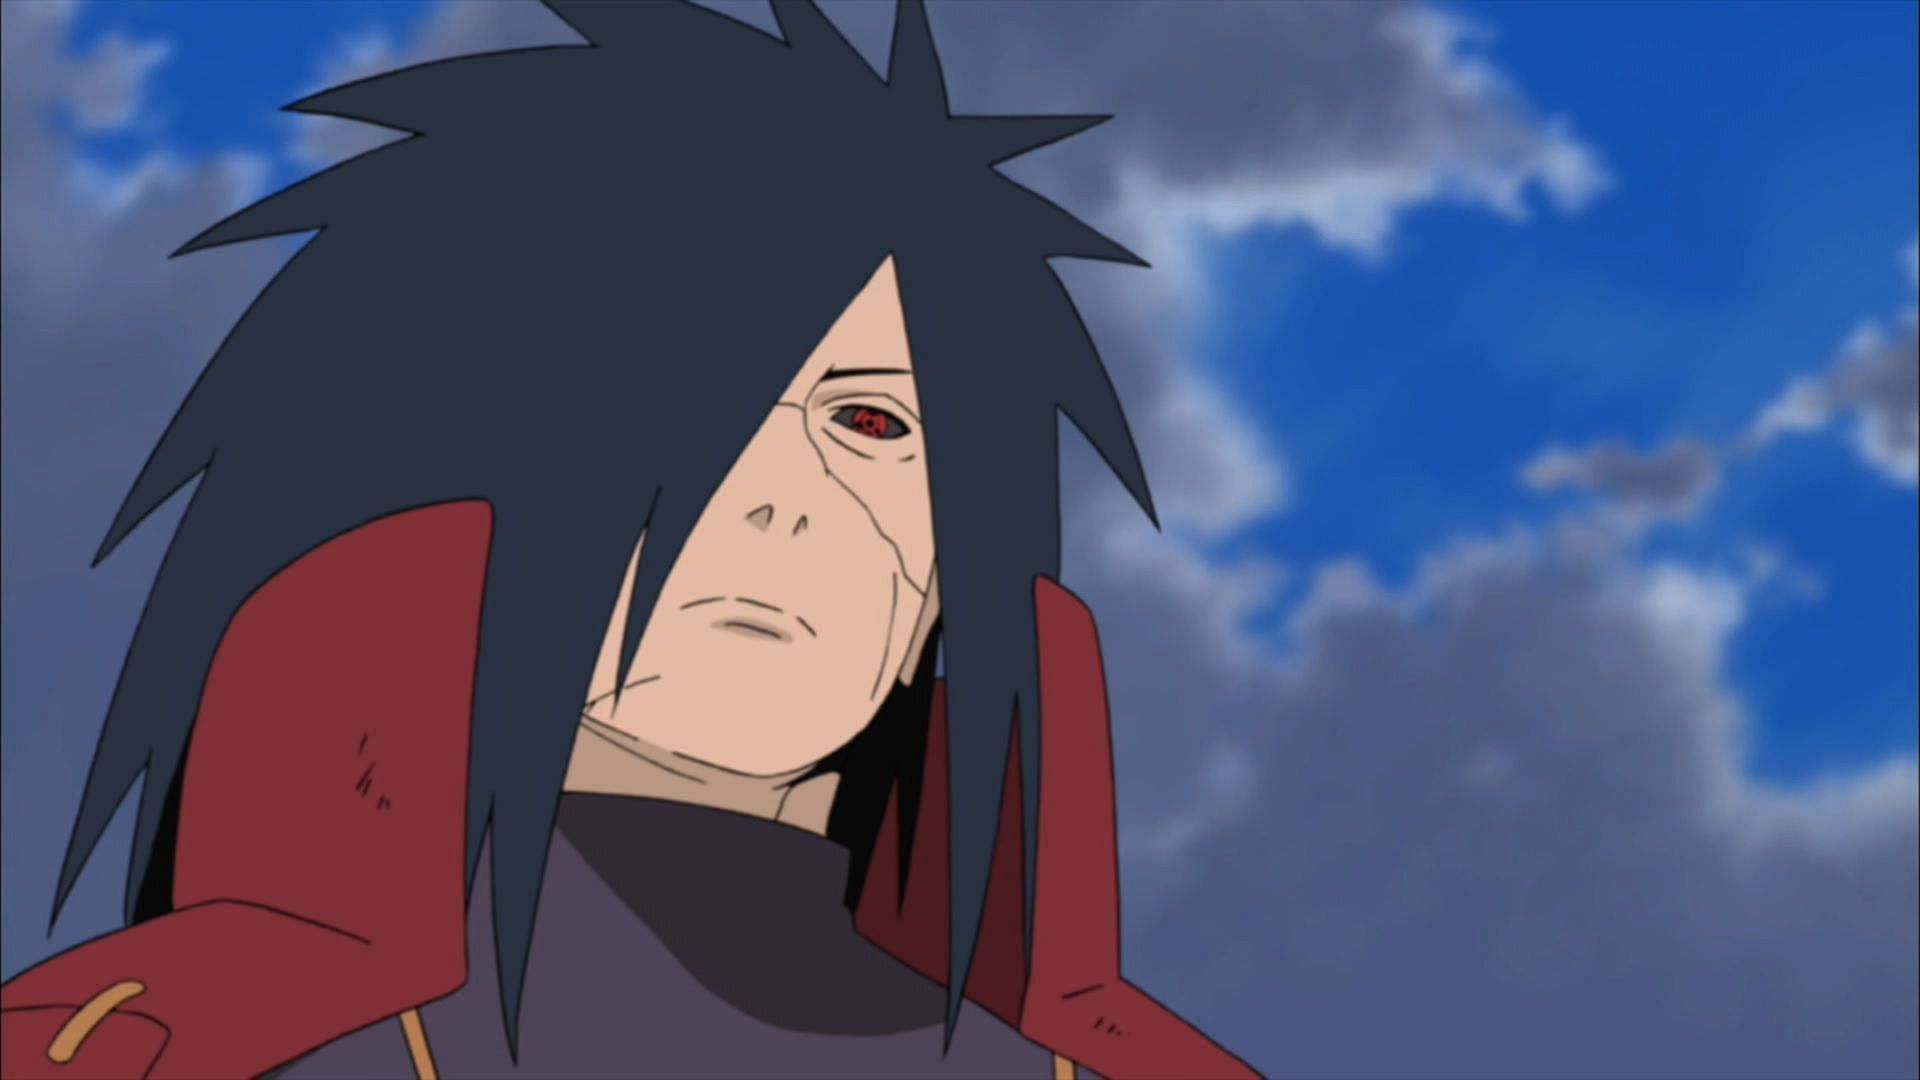 How powerful is Madara Uchiha in Naruto? How far can he go against